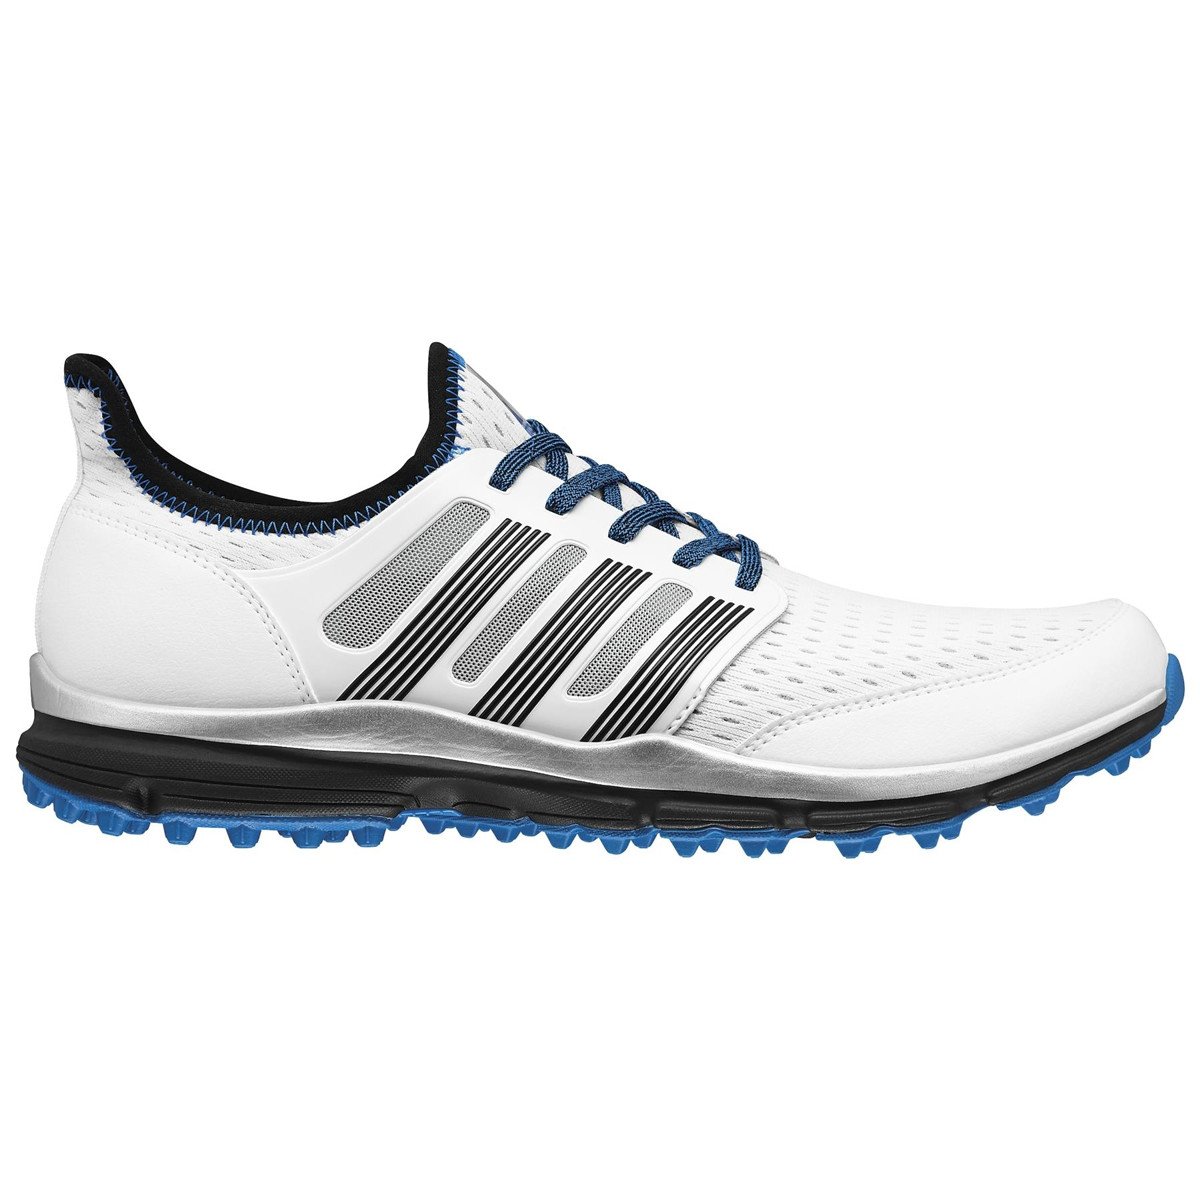 adidas climacool spikeless golf shoes